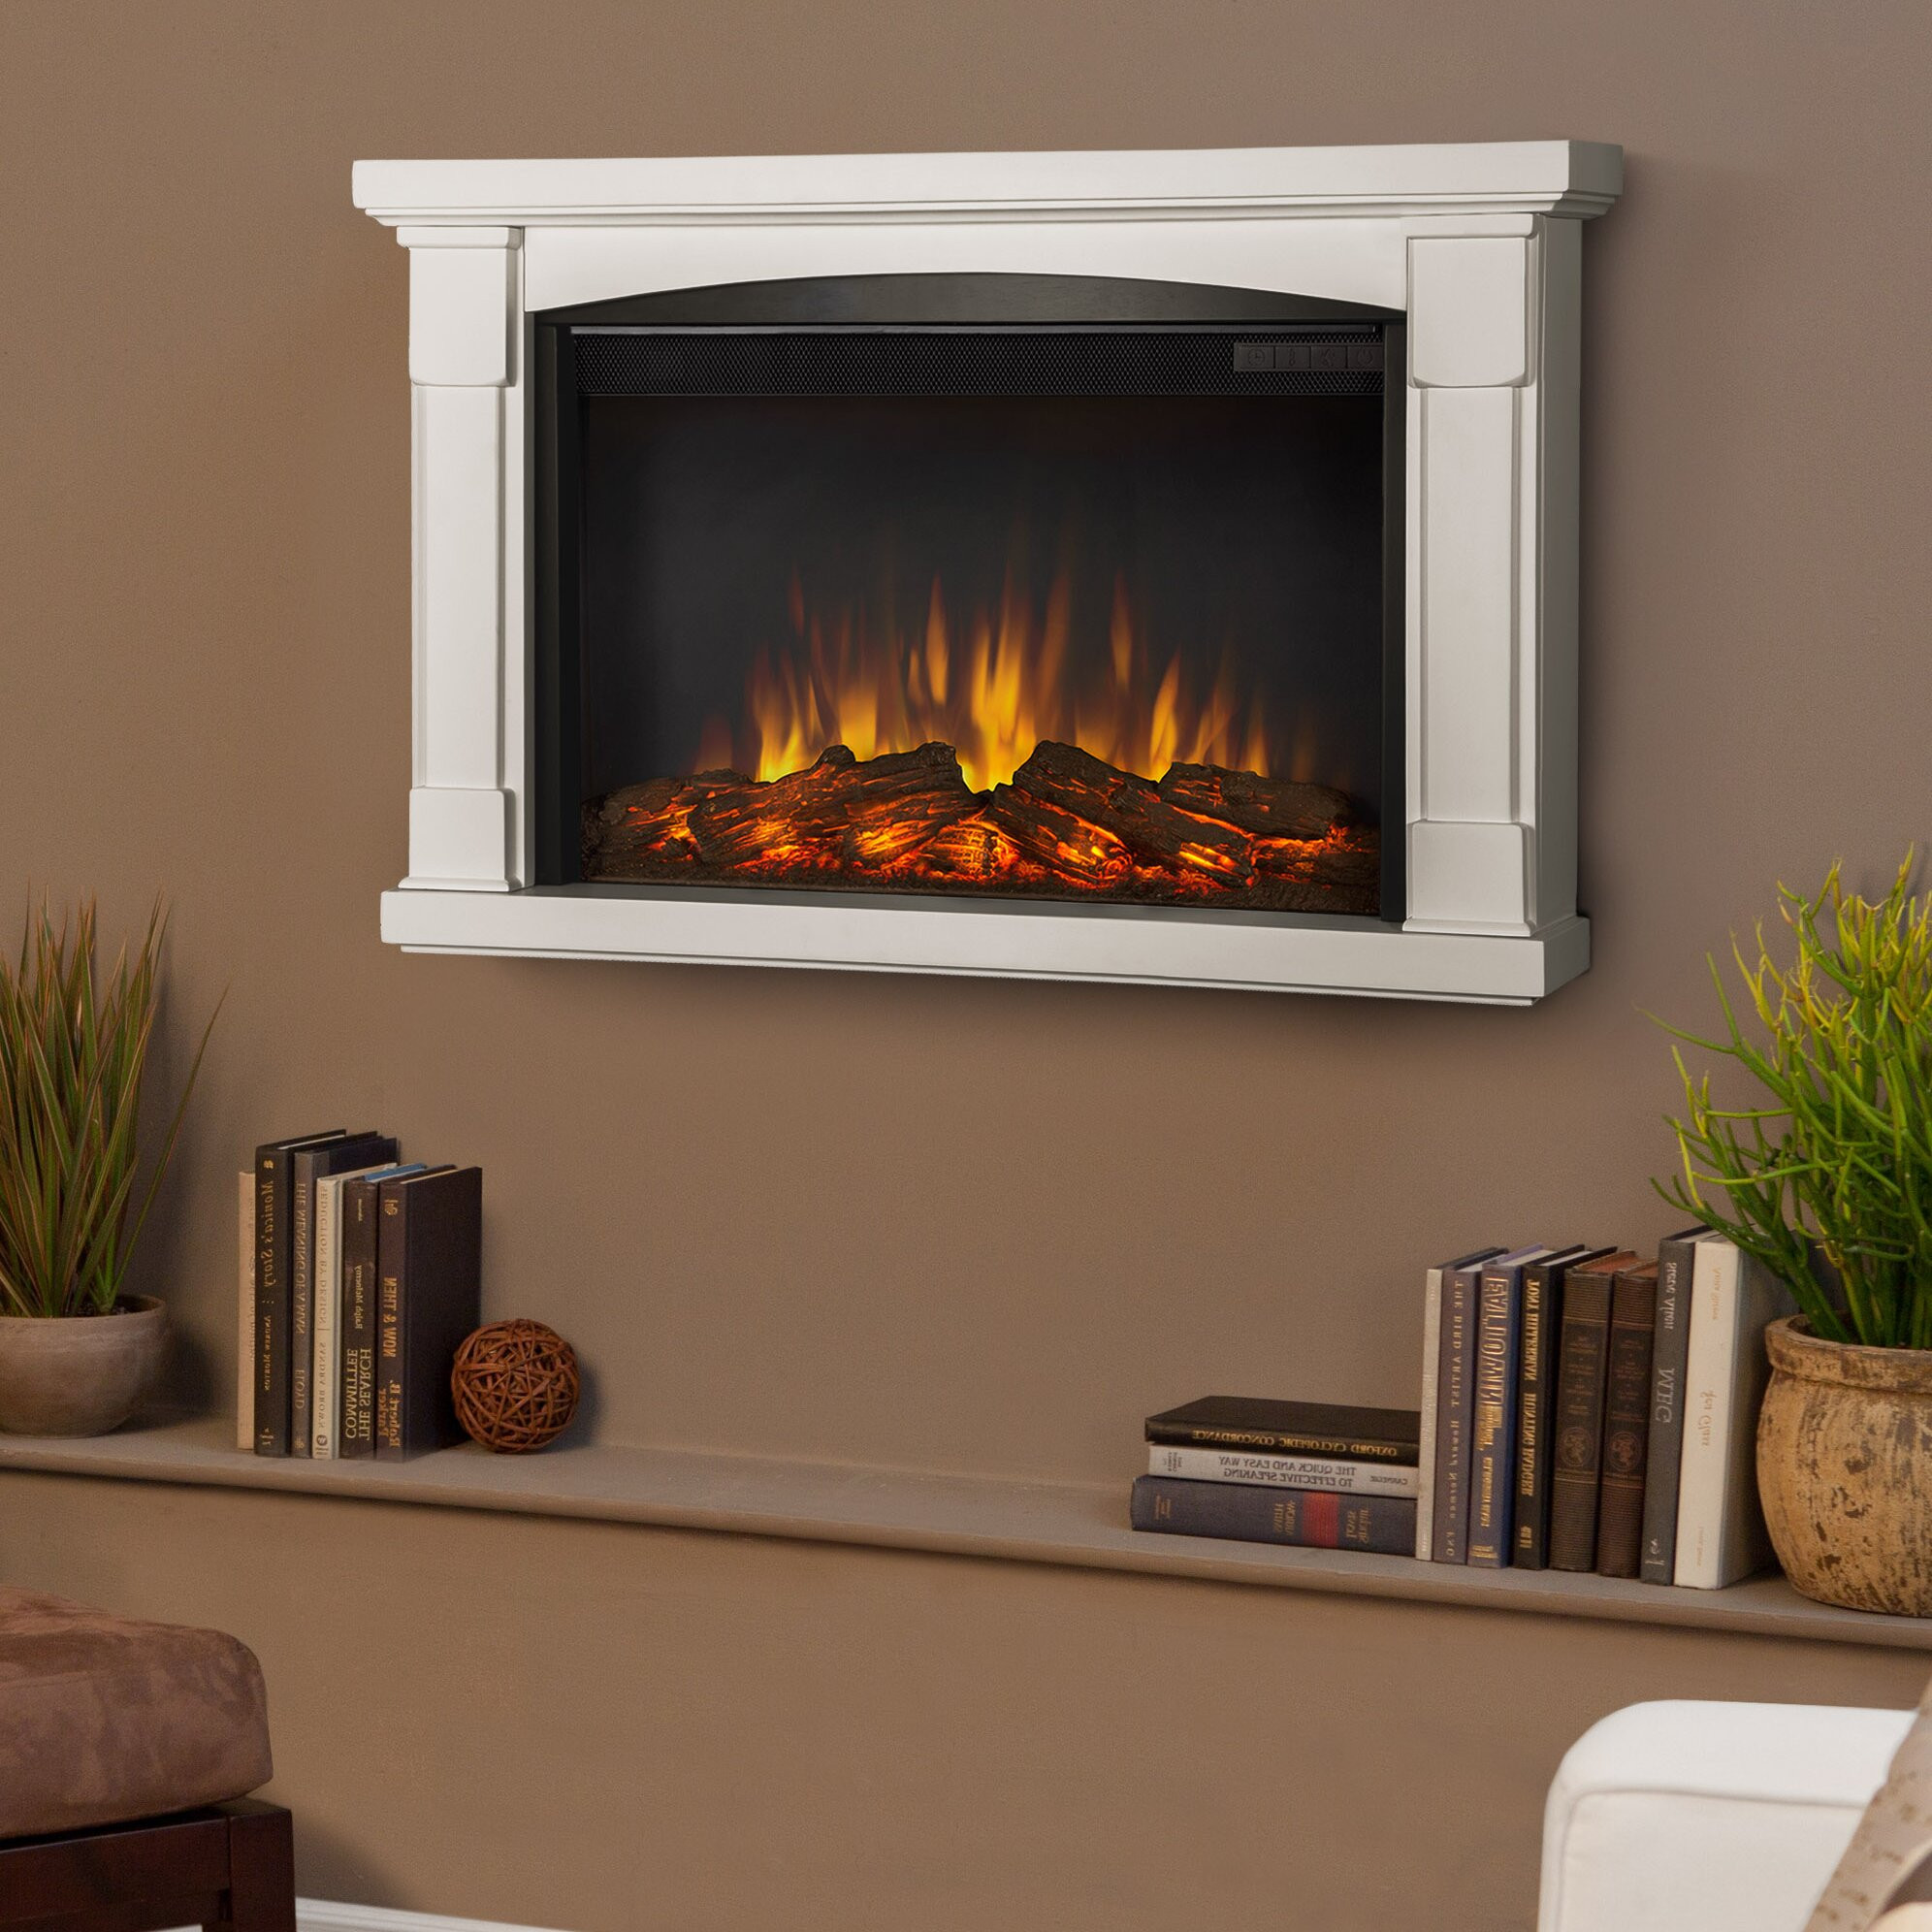 Hanging Electric Fireplace
 Slim Brighton Wall Mounted Electric Fireplace